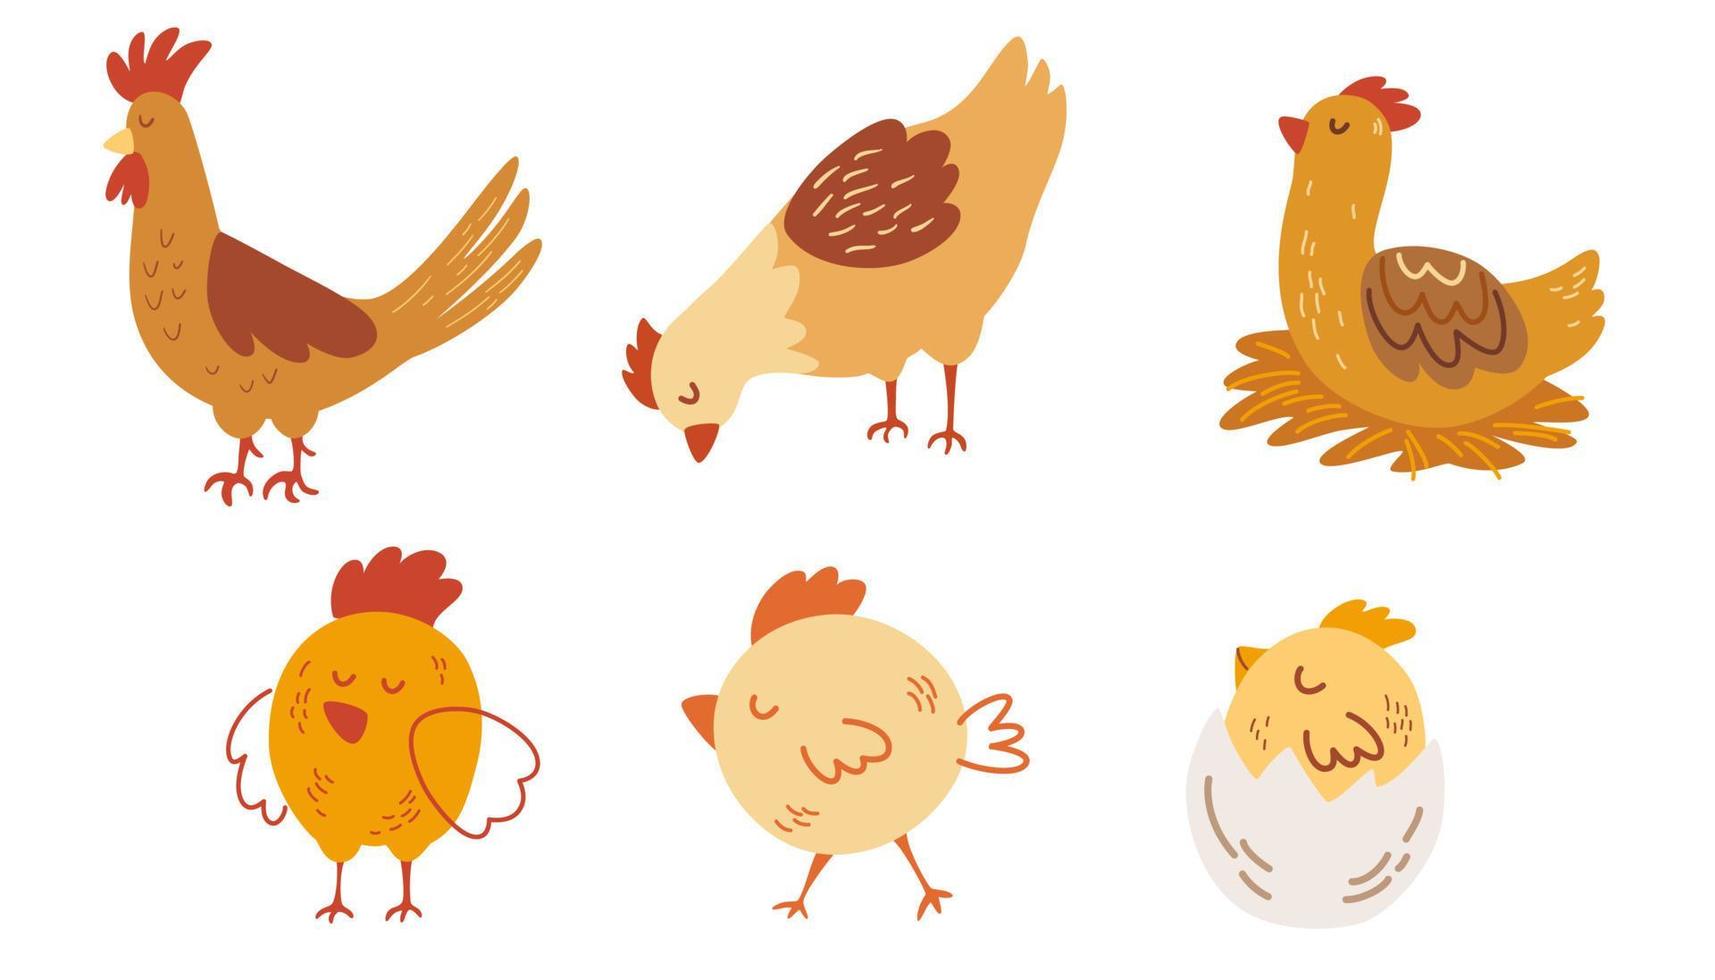 Farm animals. Chicken, rooster and chicks. Domestic chicken set. Cute farm animals vector cartoon illustration isolated the white background.